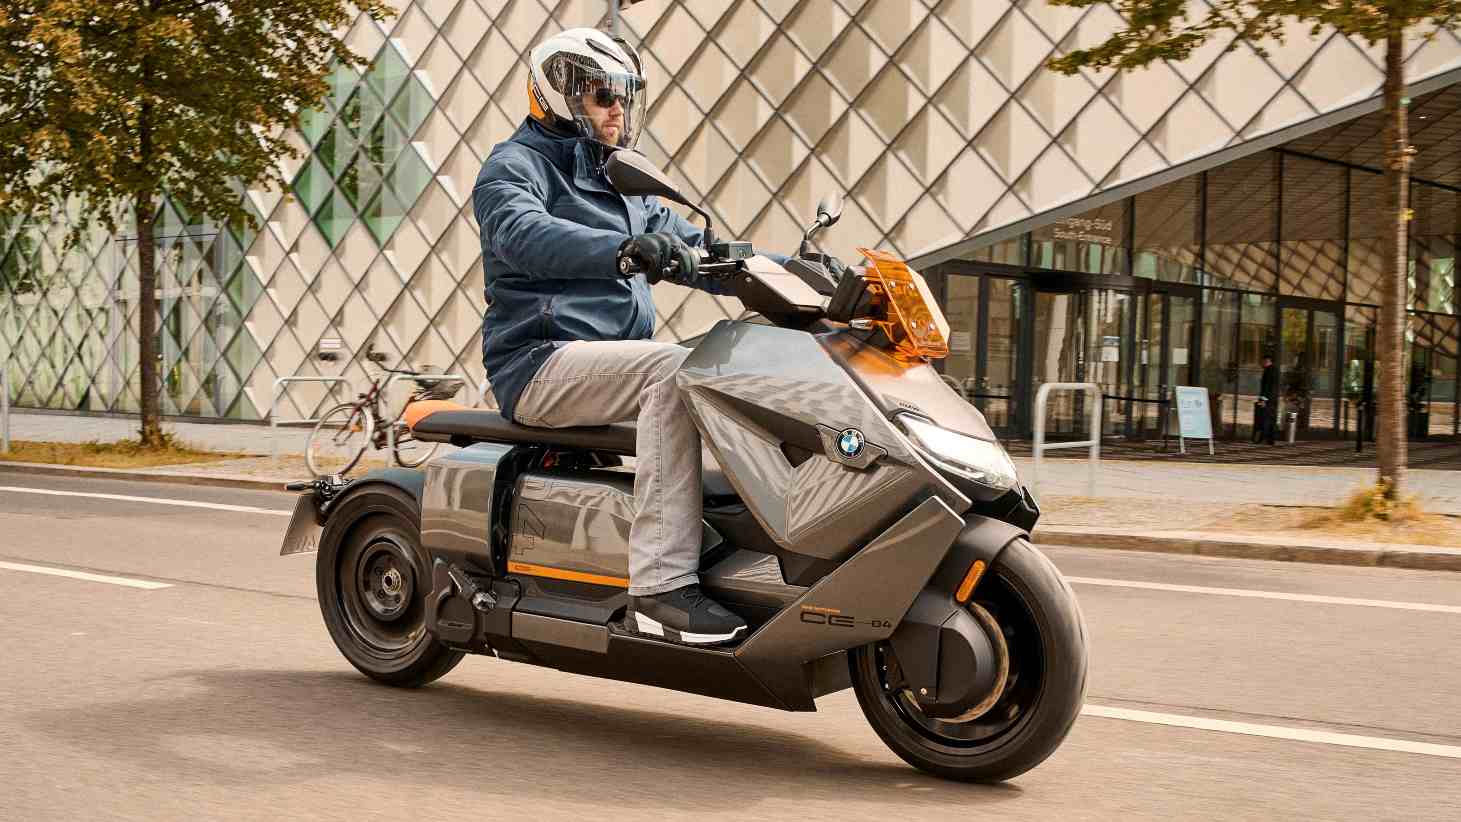 The BMW CE 04 can get from 0 to 50 kph in just 2.6 seconds. Image: BMW Motorrad